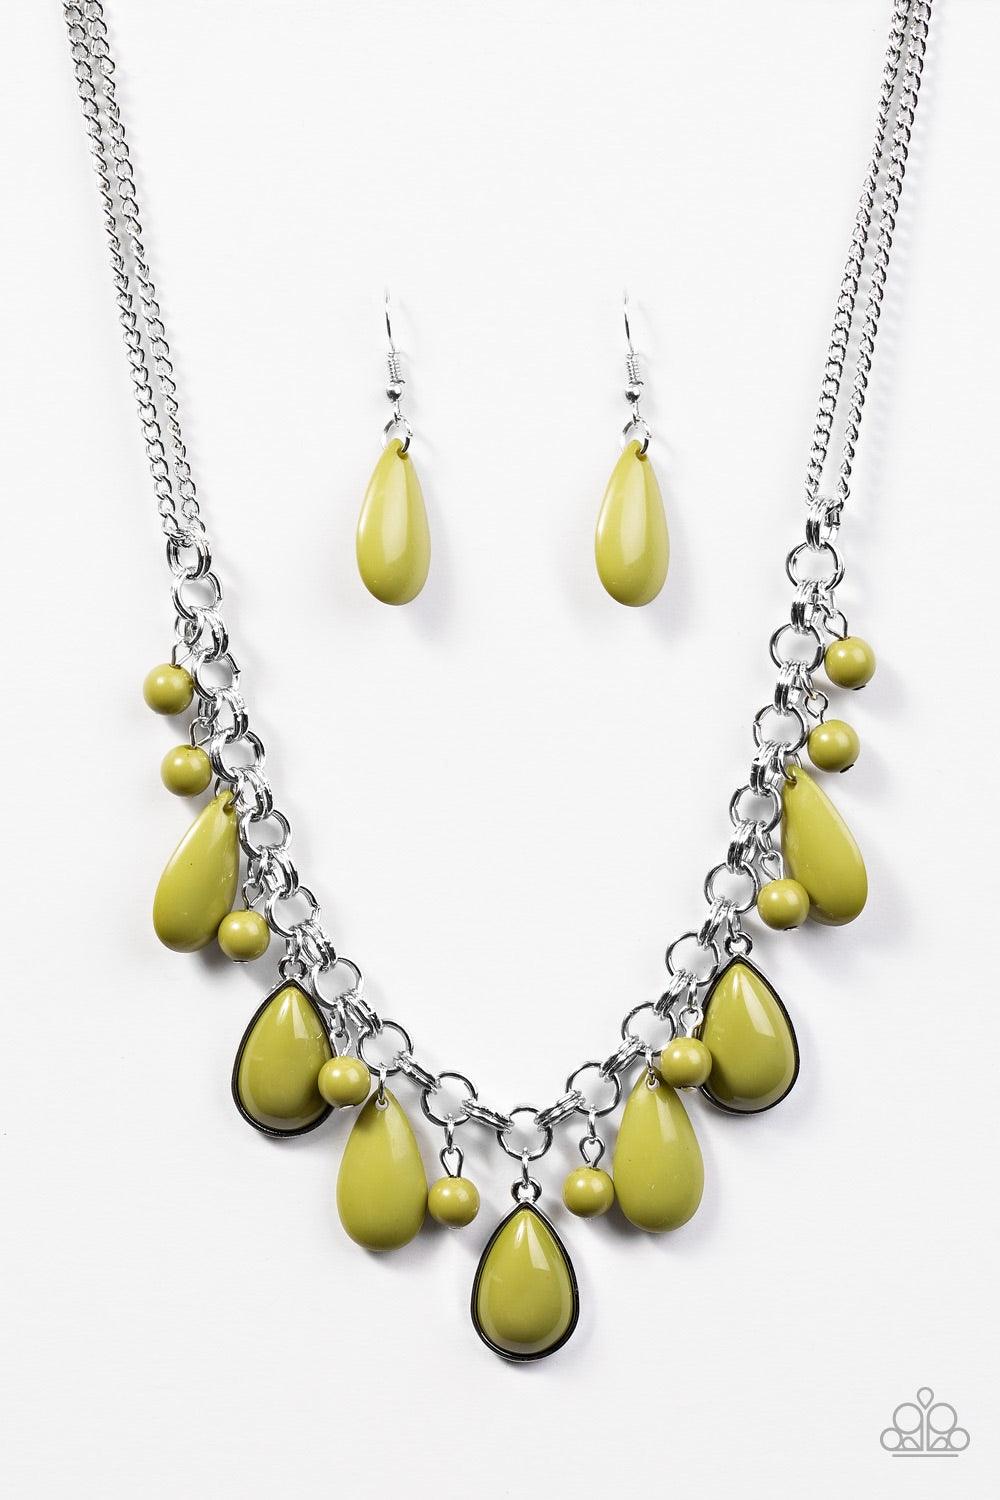 Paparazzi Accessories The Side Of Malibu - Green Tinted in the refreshing fall hue of Golden Lime, polished green beads and teardrops cascade from the bottom of a dramatic silver chain. Three green teardrops are pressed into sleek silver frames, catching